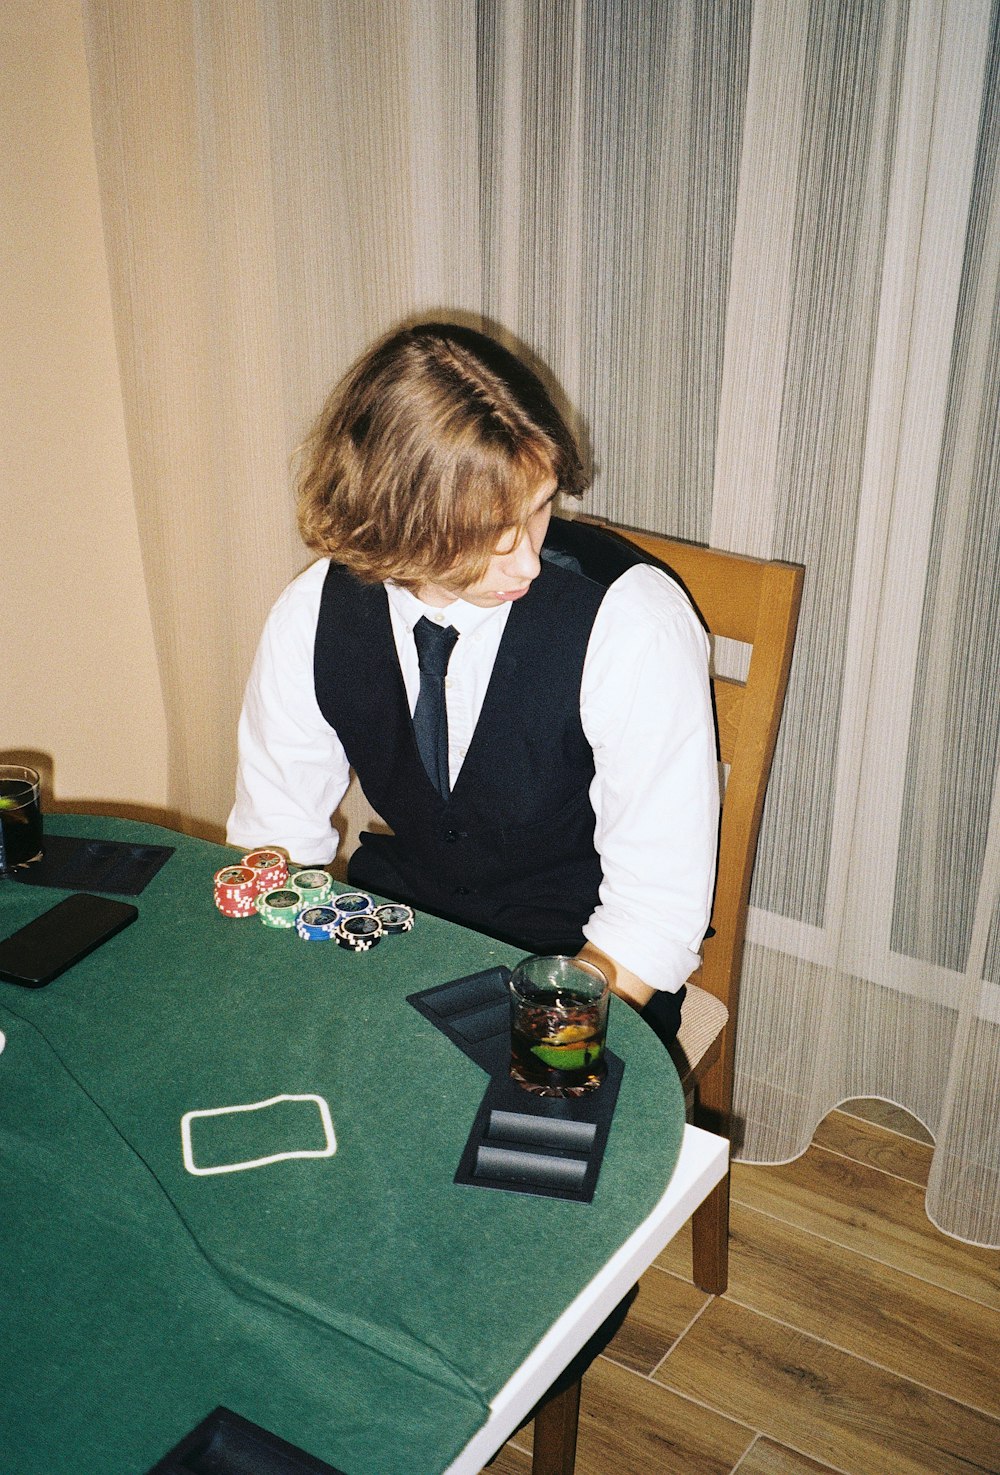 a young boy sitting at a green table with cards